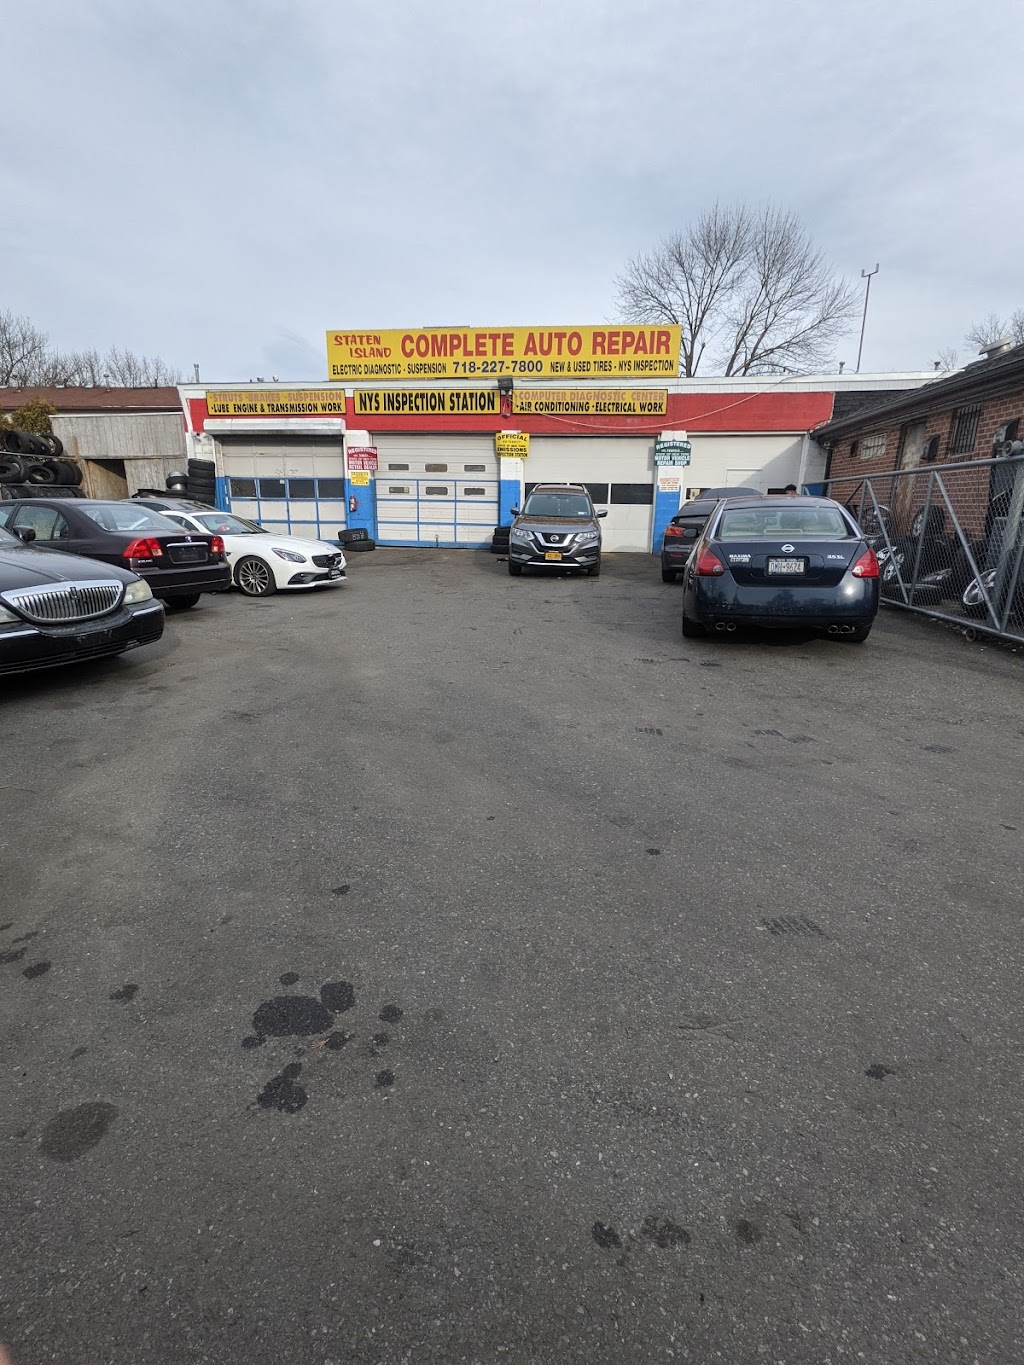 Staten Island Auto and Used Tires | 4225 Amboy Rd, Staten Island, NY 10308 | Phone: (718) 227-7800